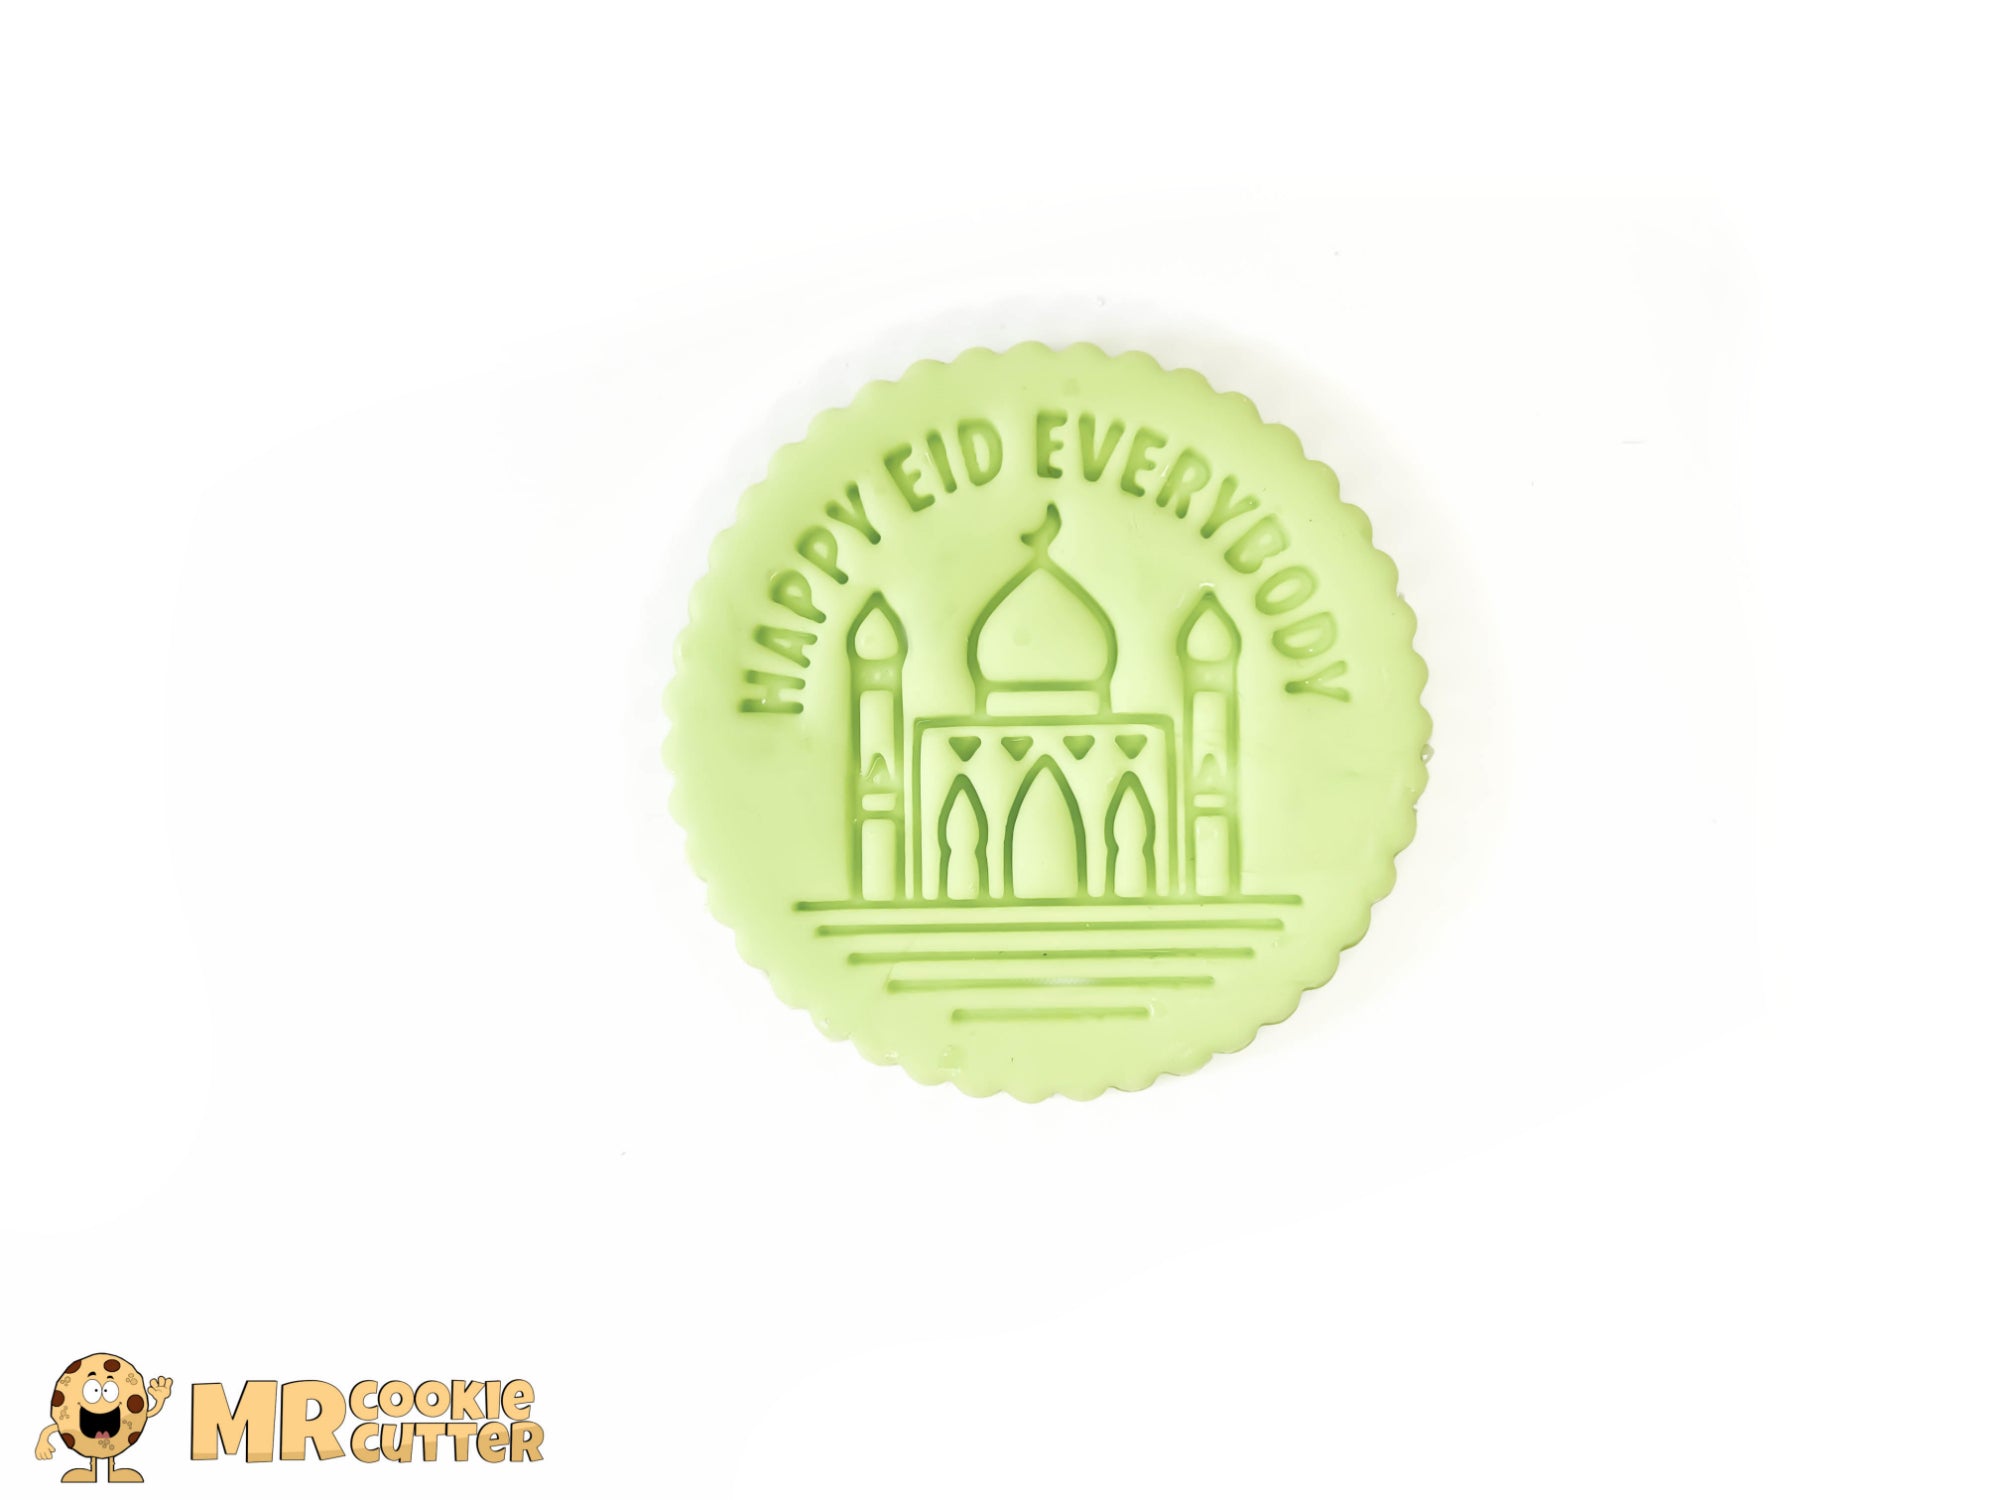 Happy Eid Everybody Mosque Design Cupcake Topper for Eid Cupcakes